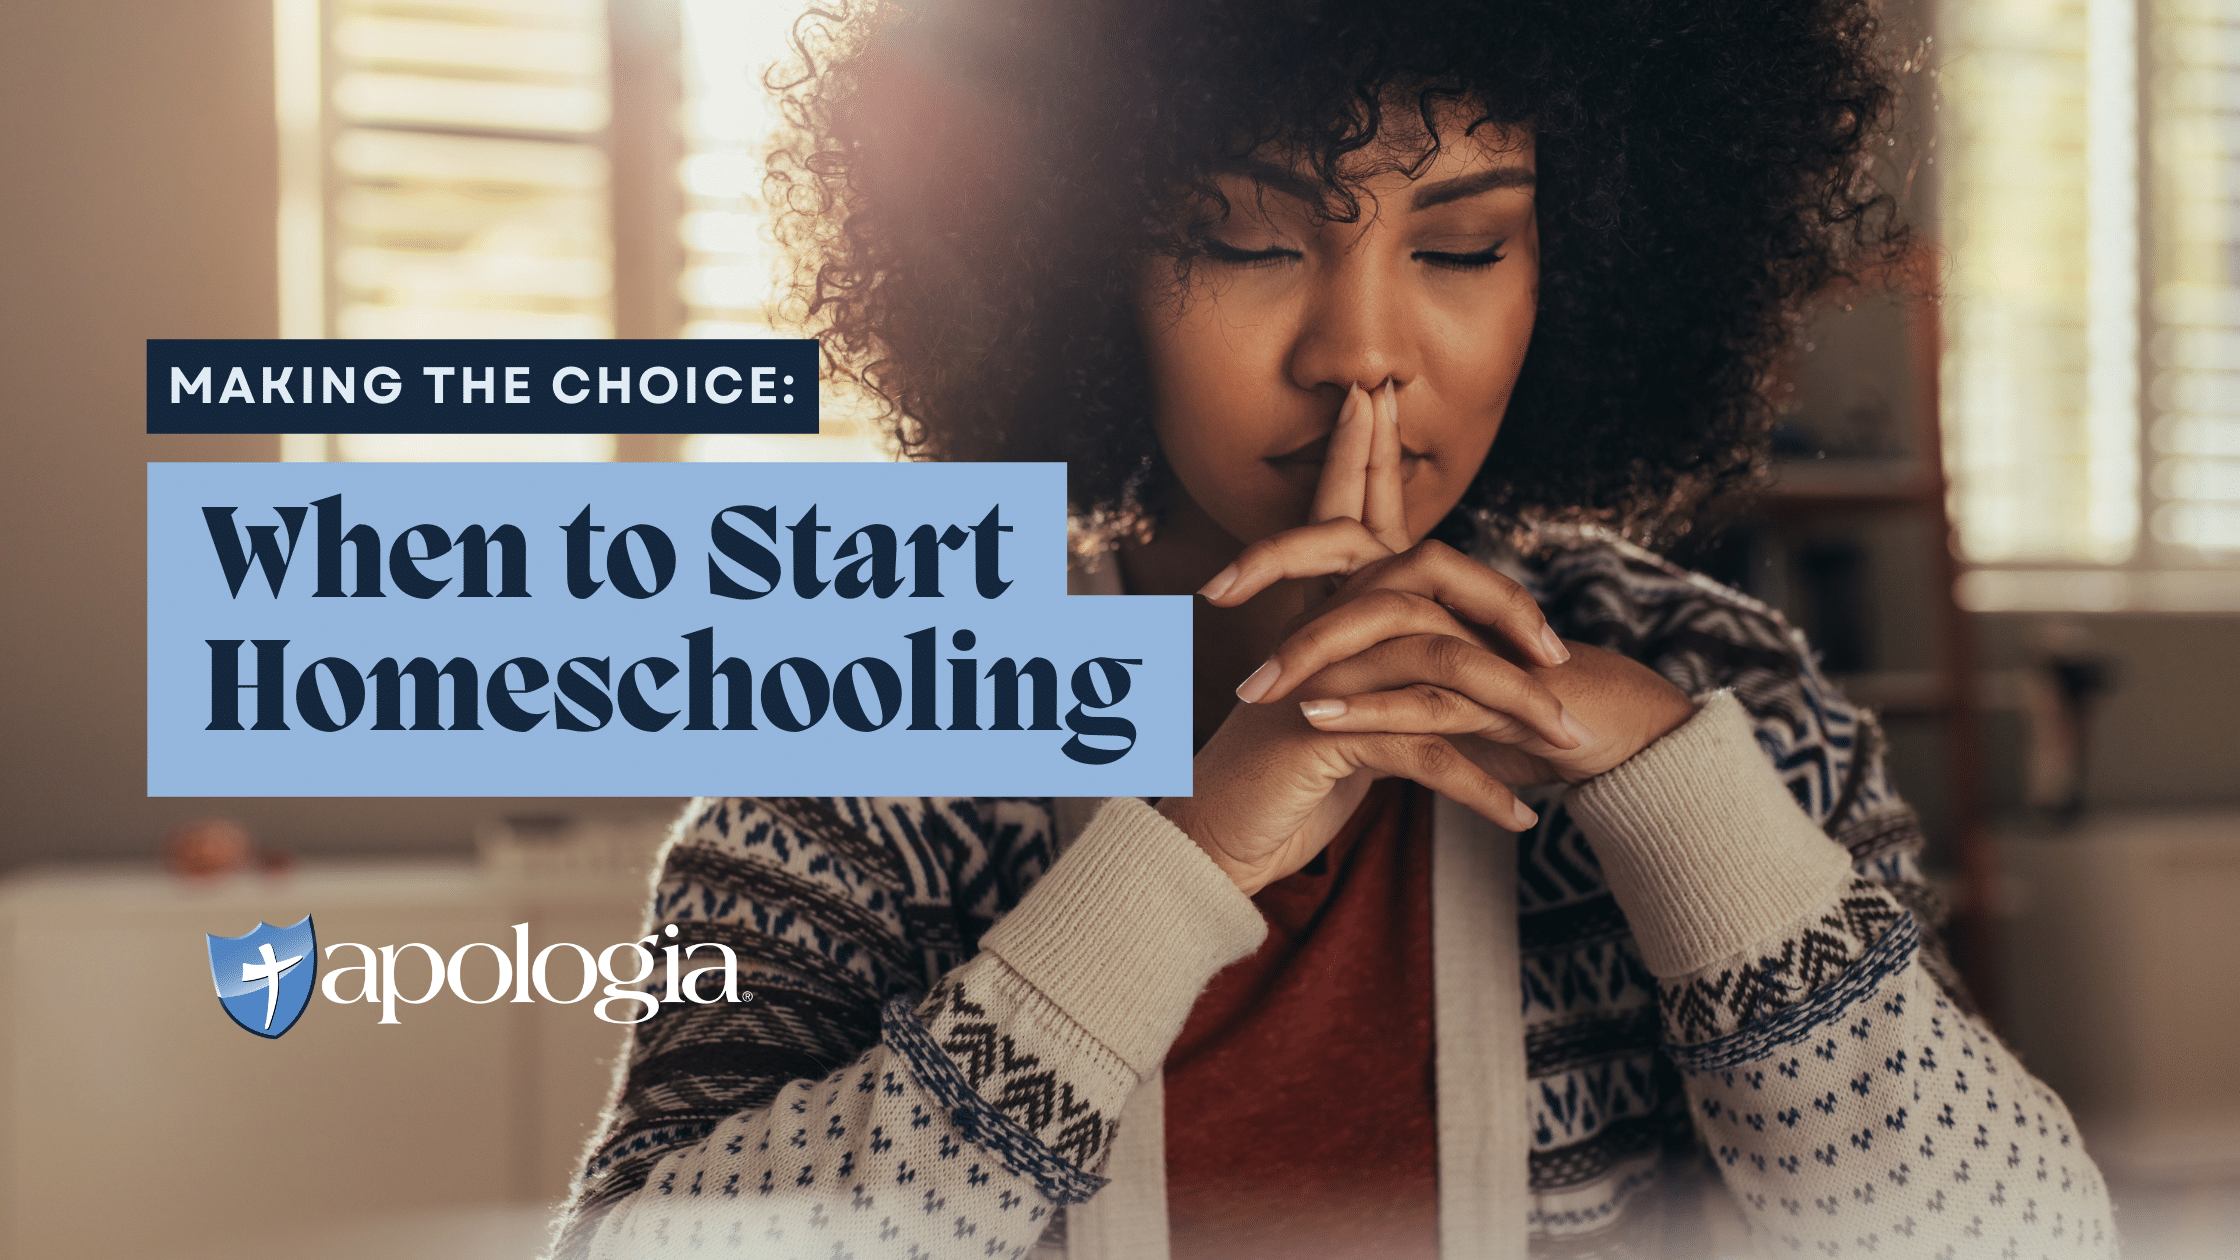 Making the Choice: When to Start Homeschooling